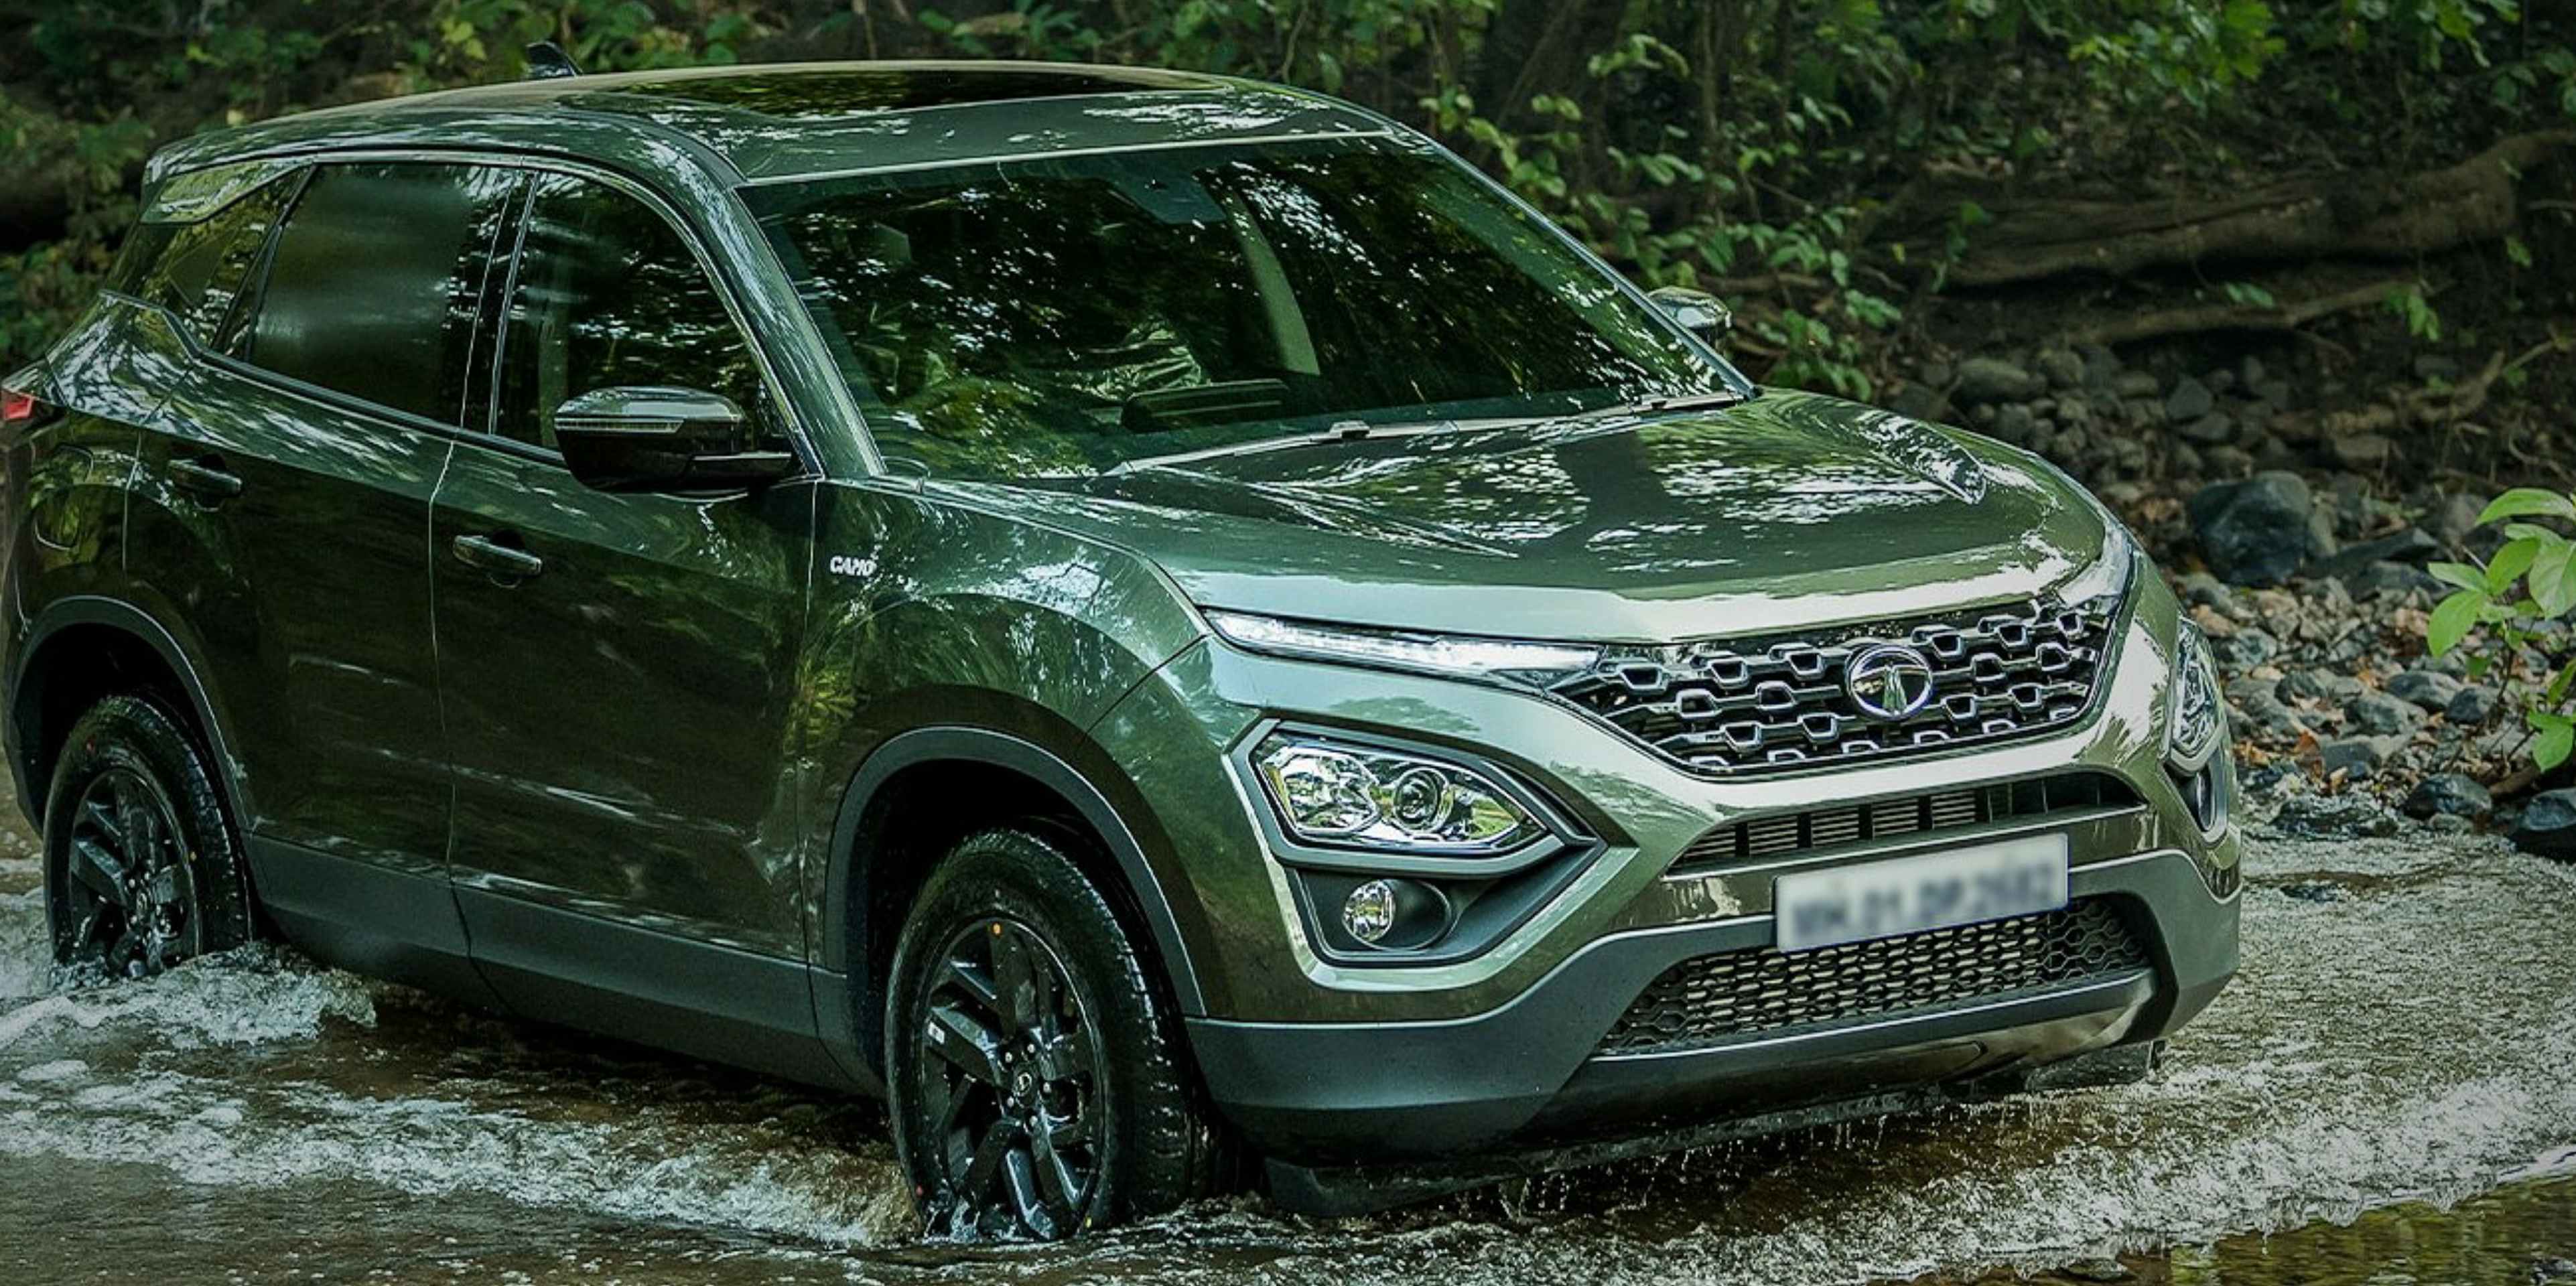 Tata Harrier Camo Edition Launched At Rs 16.50 Lakh